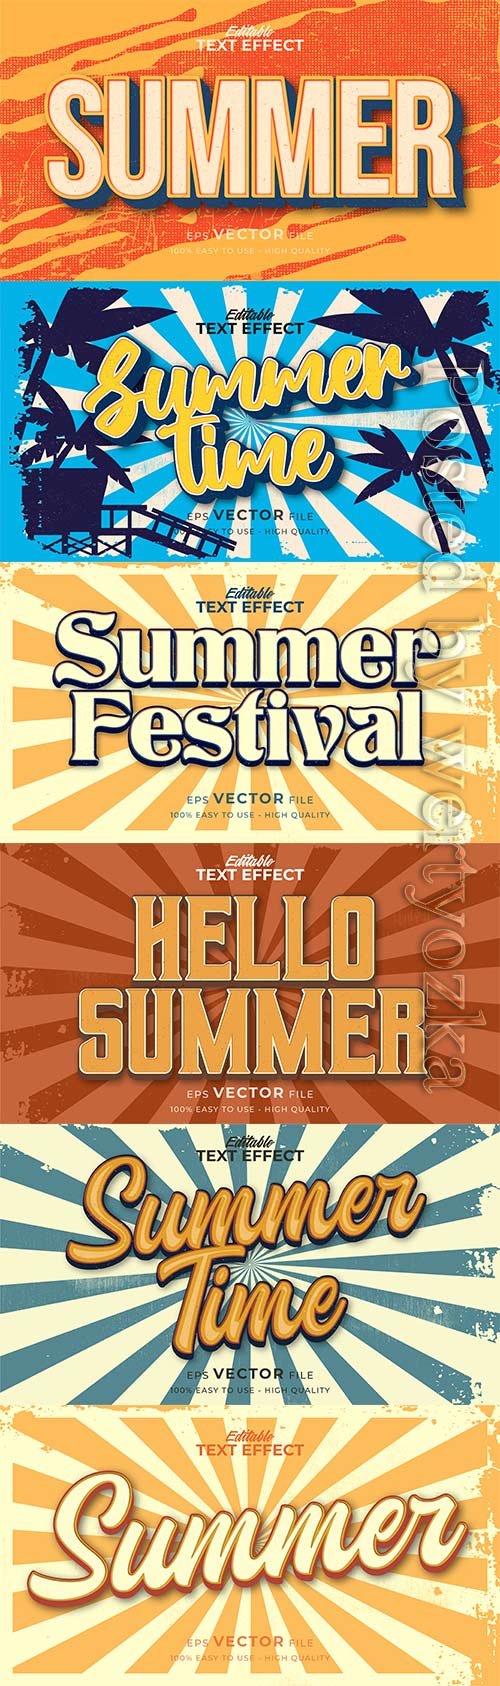 Retro summer holiday text in grunge style theme in vector vol 3